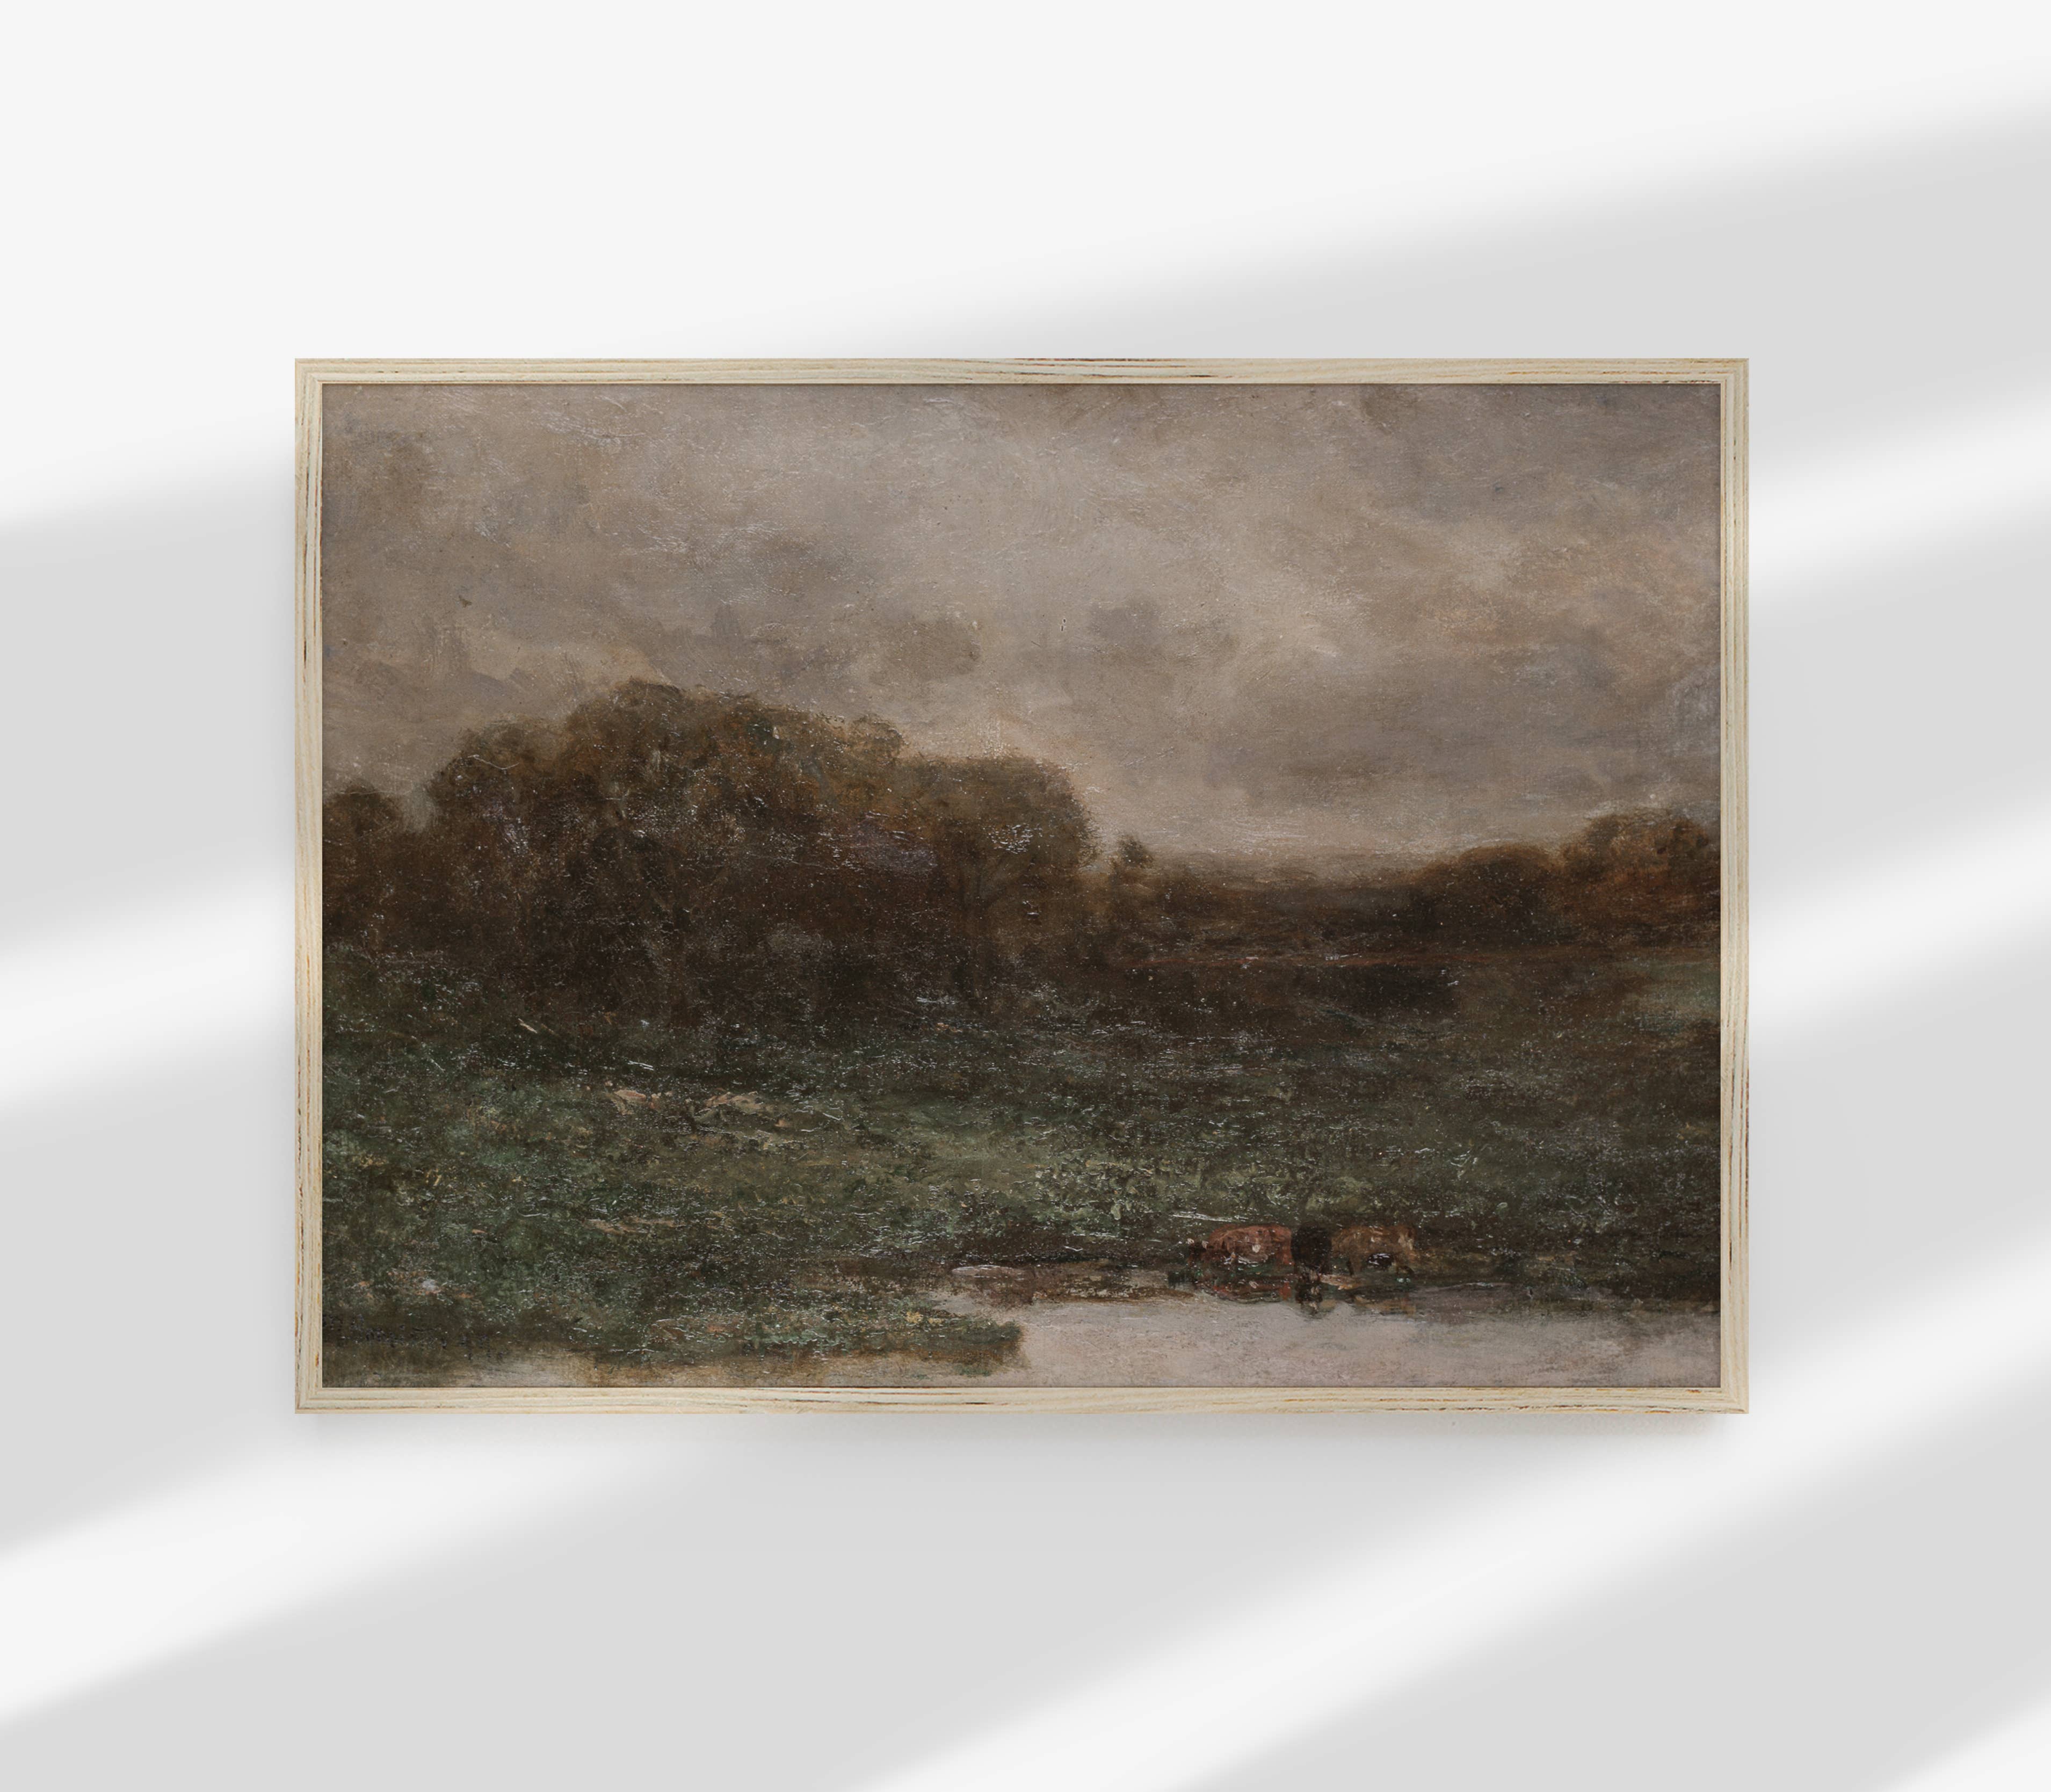 Vintage Oil Painting | Moody Muted Landscape Art Print L135: 16”x20”